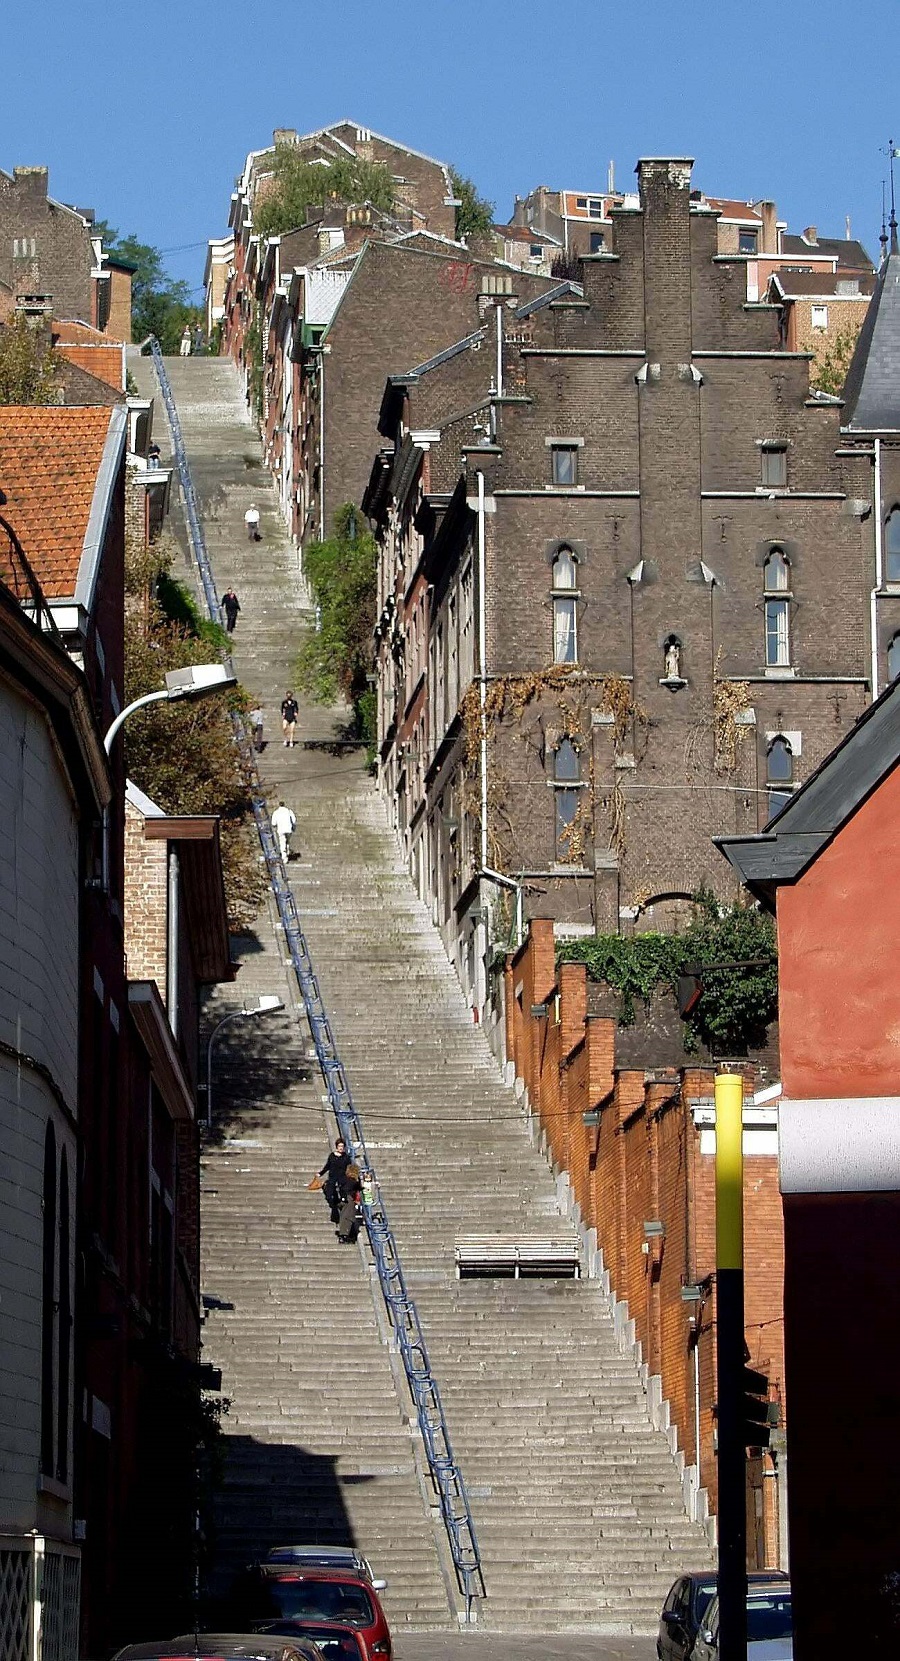 Montagne De Bueren Staircase In Liège, Belgium | In 2013, It Was Ranked As #1 On The Huffington Post's List Of Most Extreme Staircases